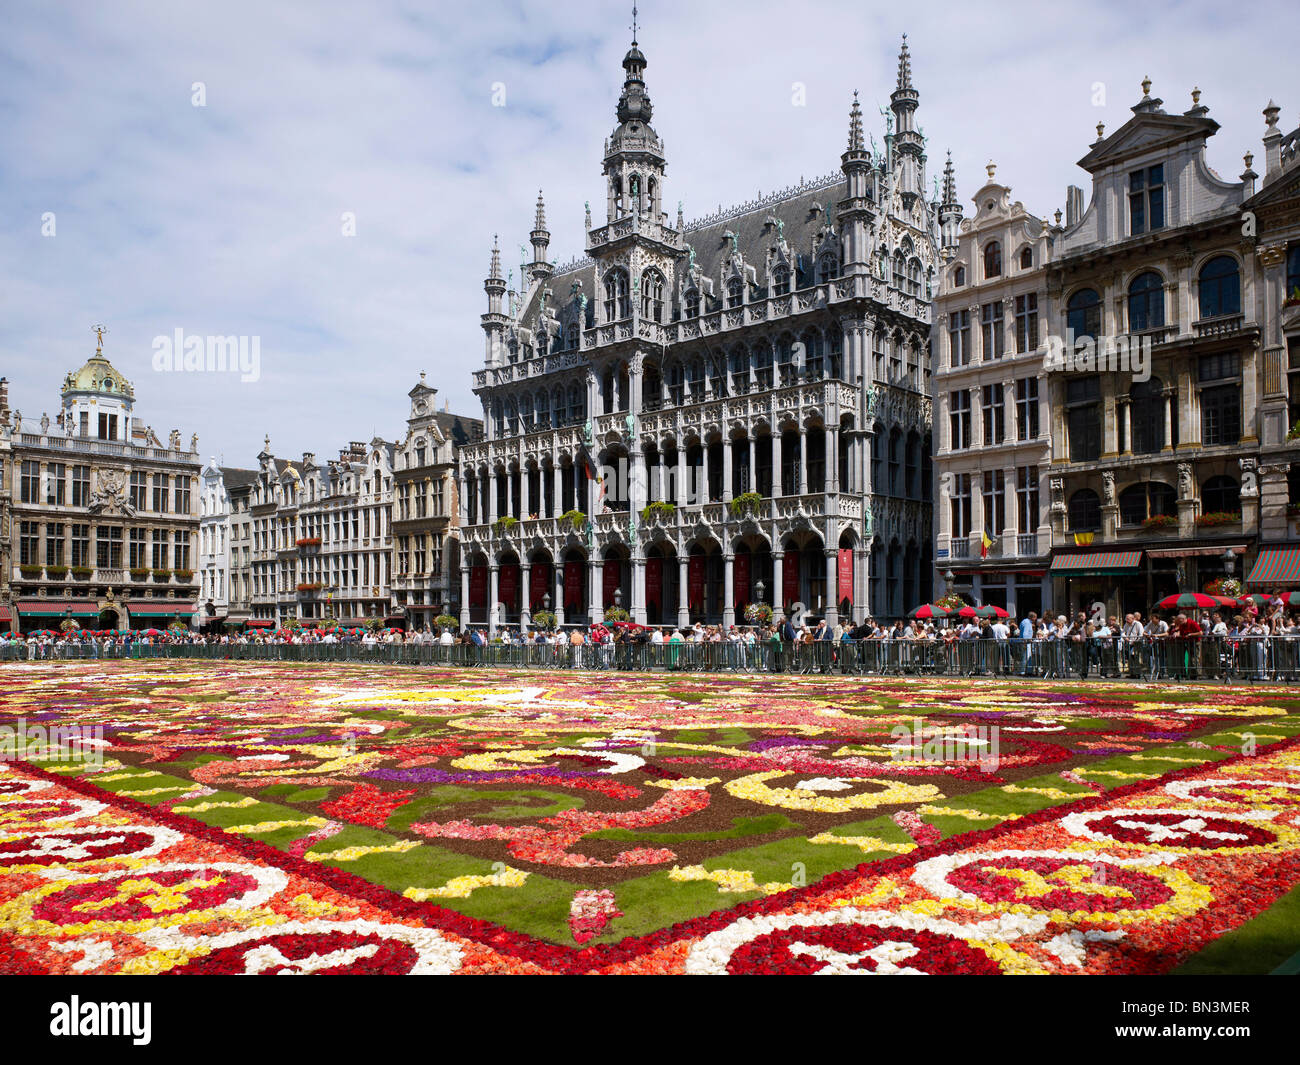 Flower bed at Grote Markt, Brussels, Belgium, Europe Stock Photo